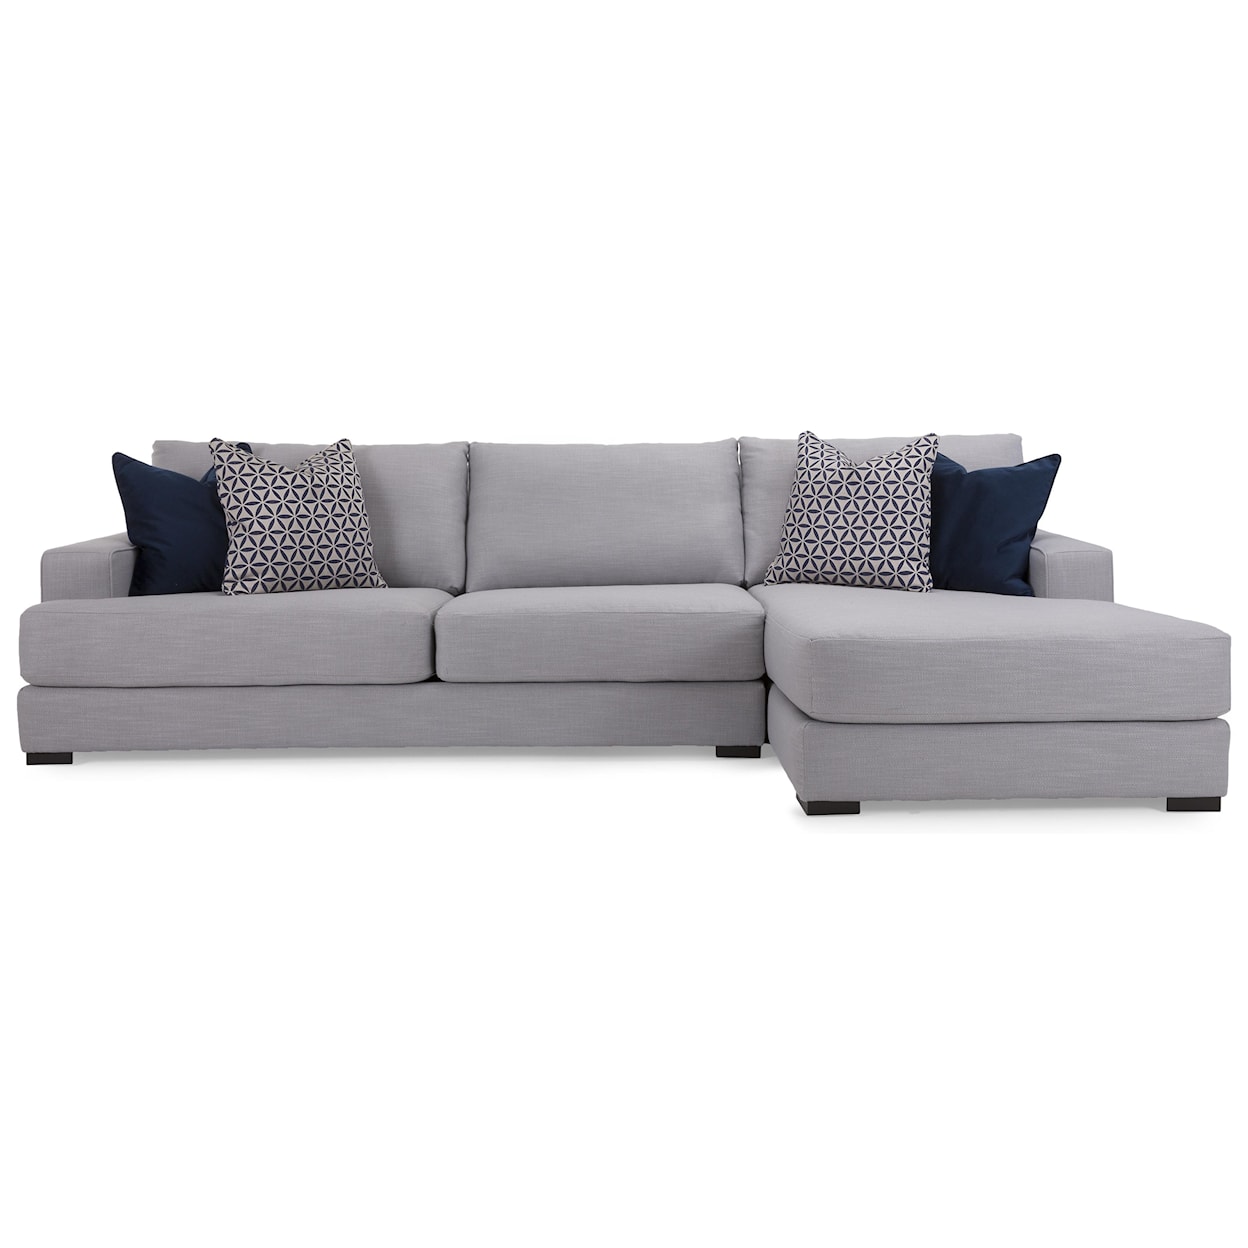 Taelor Designs Zale Sectional